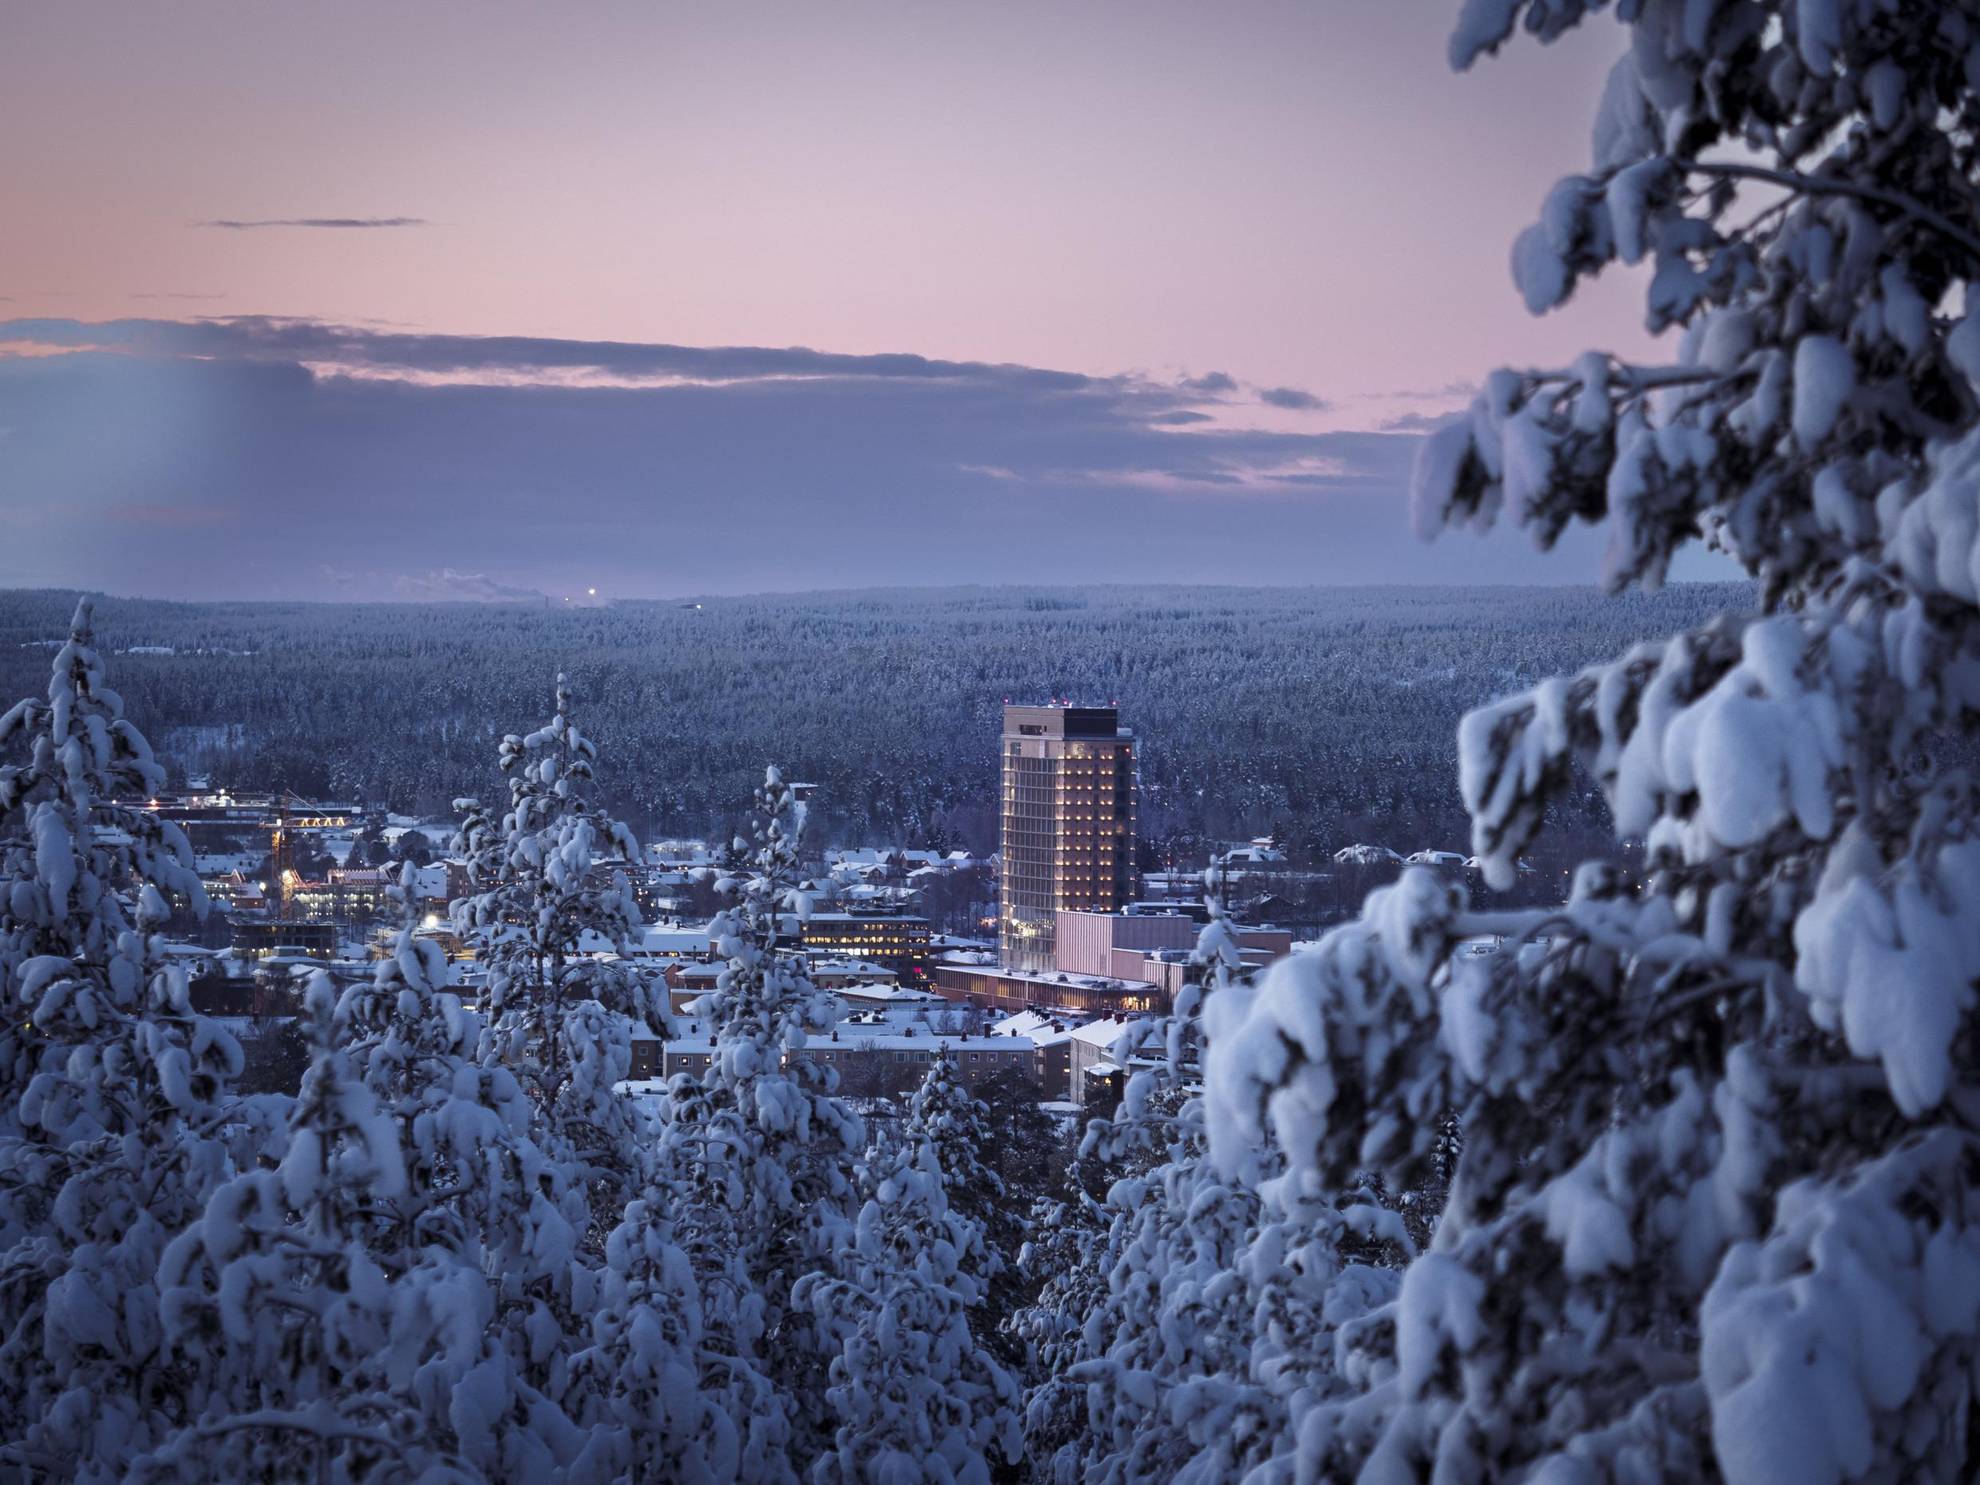 A snow covered city surrounded by trees is seen from afar. The Wood Hotel is the tallest building in the city.